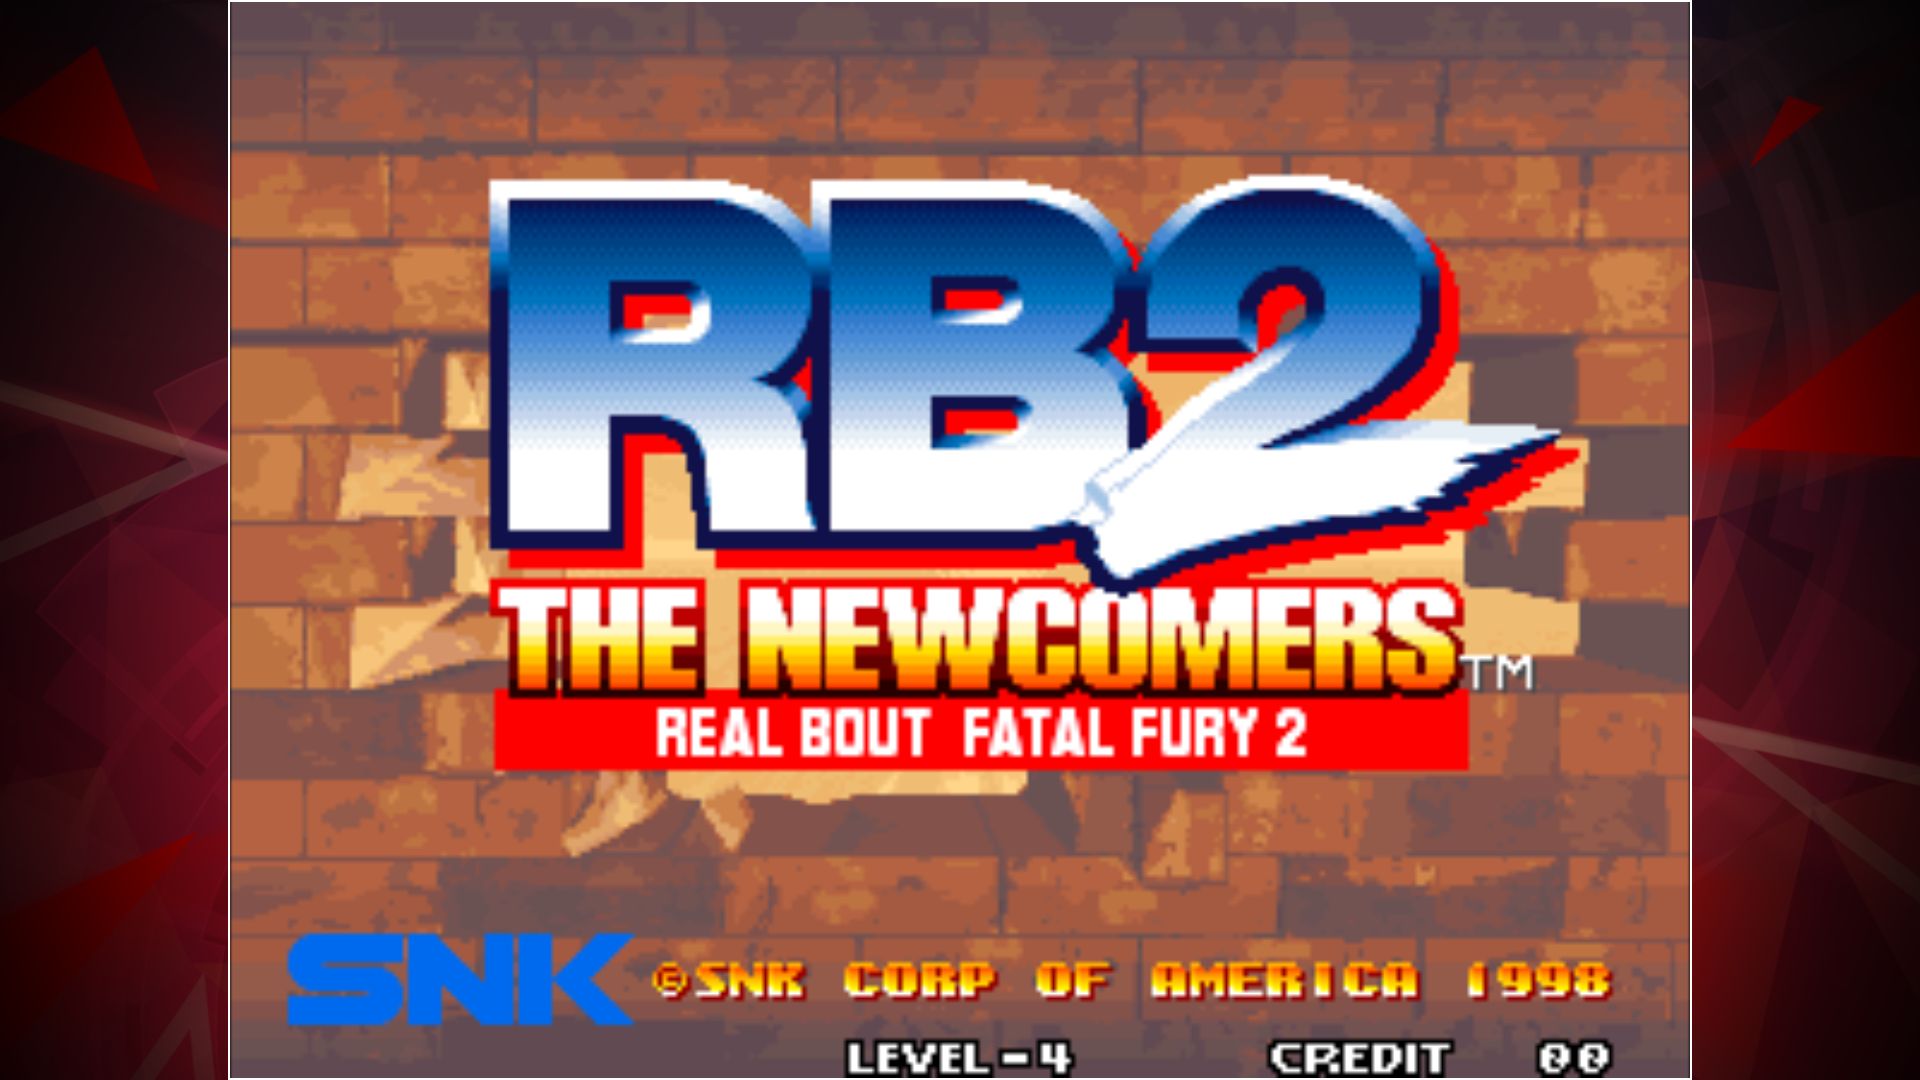 Scarica REAL BOUT FATAL FURY 2 gratis per Android.